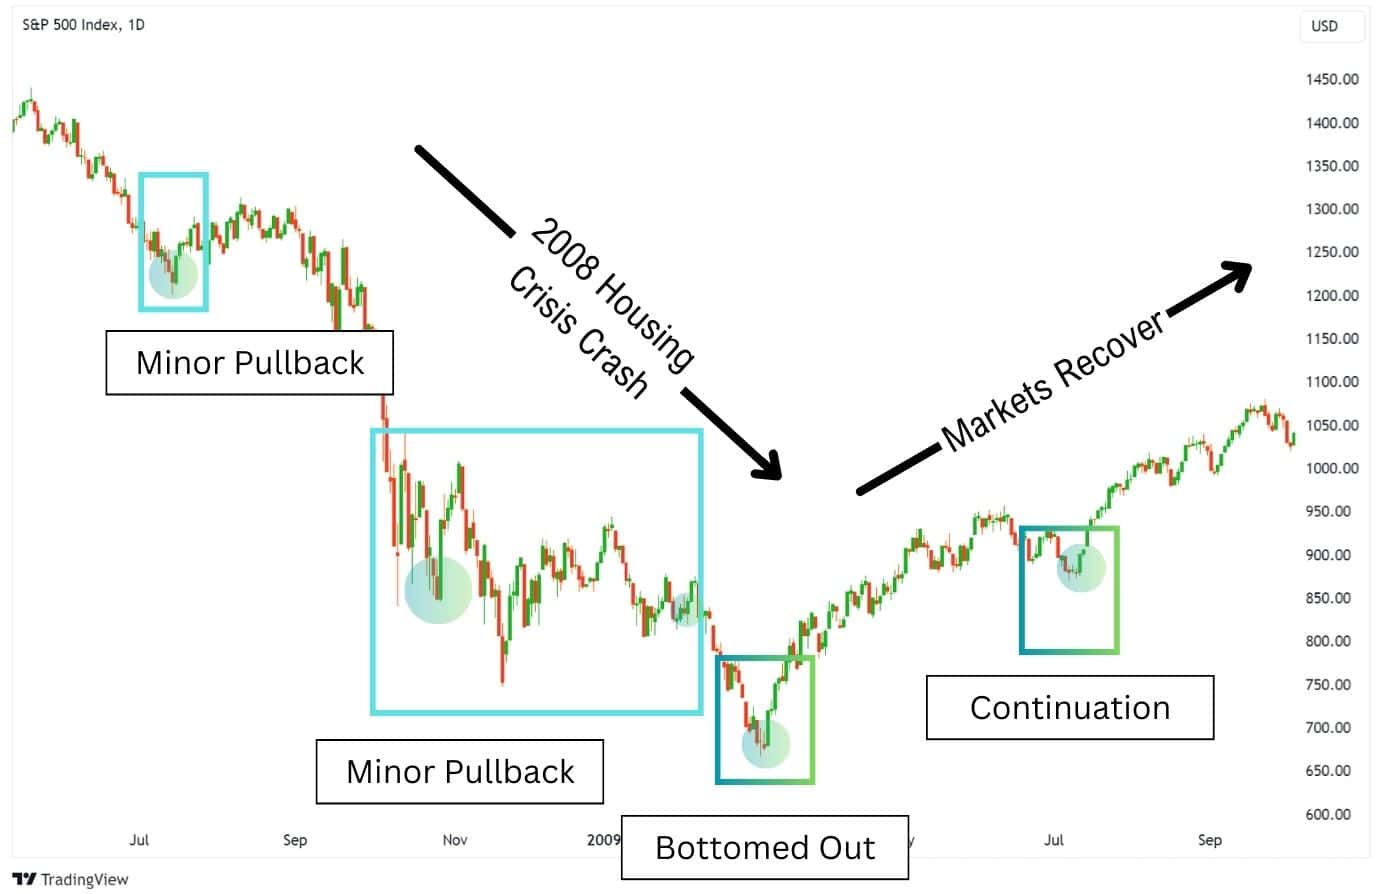 An example of bullish engulfing patterns on the US500 or S&P500 during bear markets and bull markets.